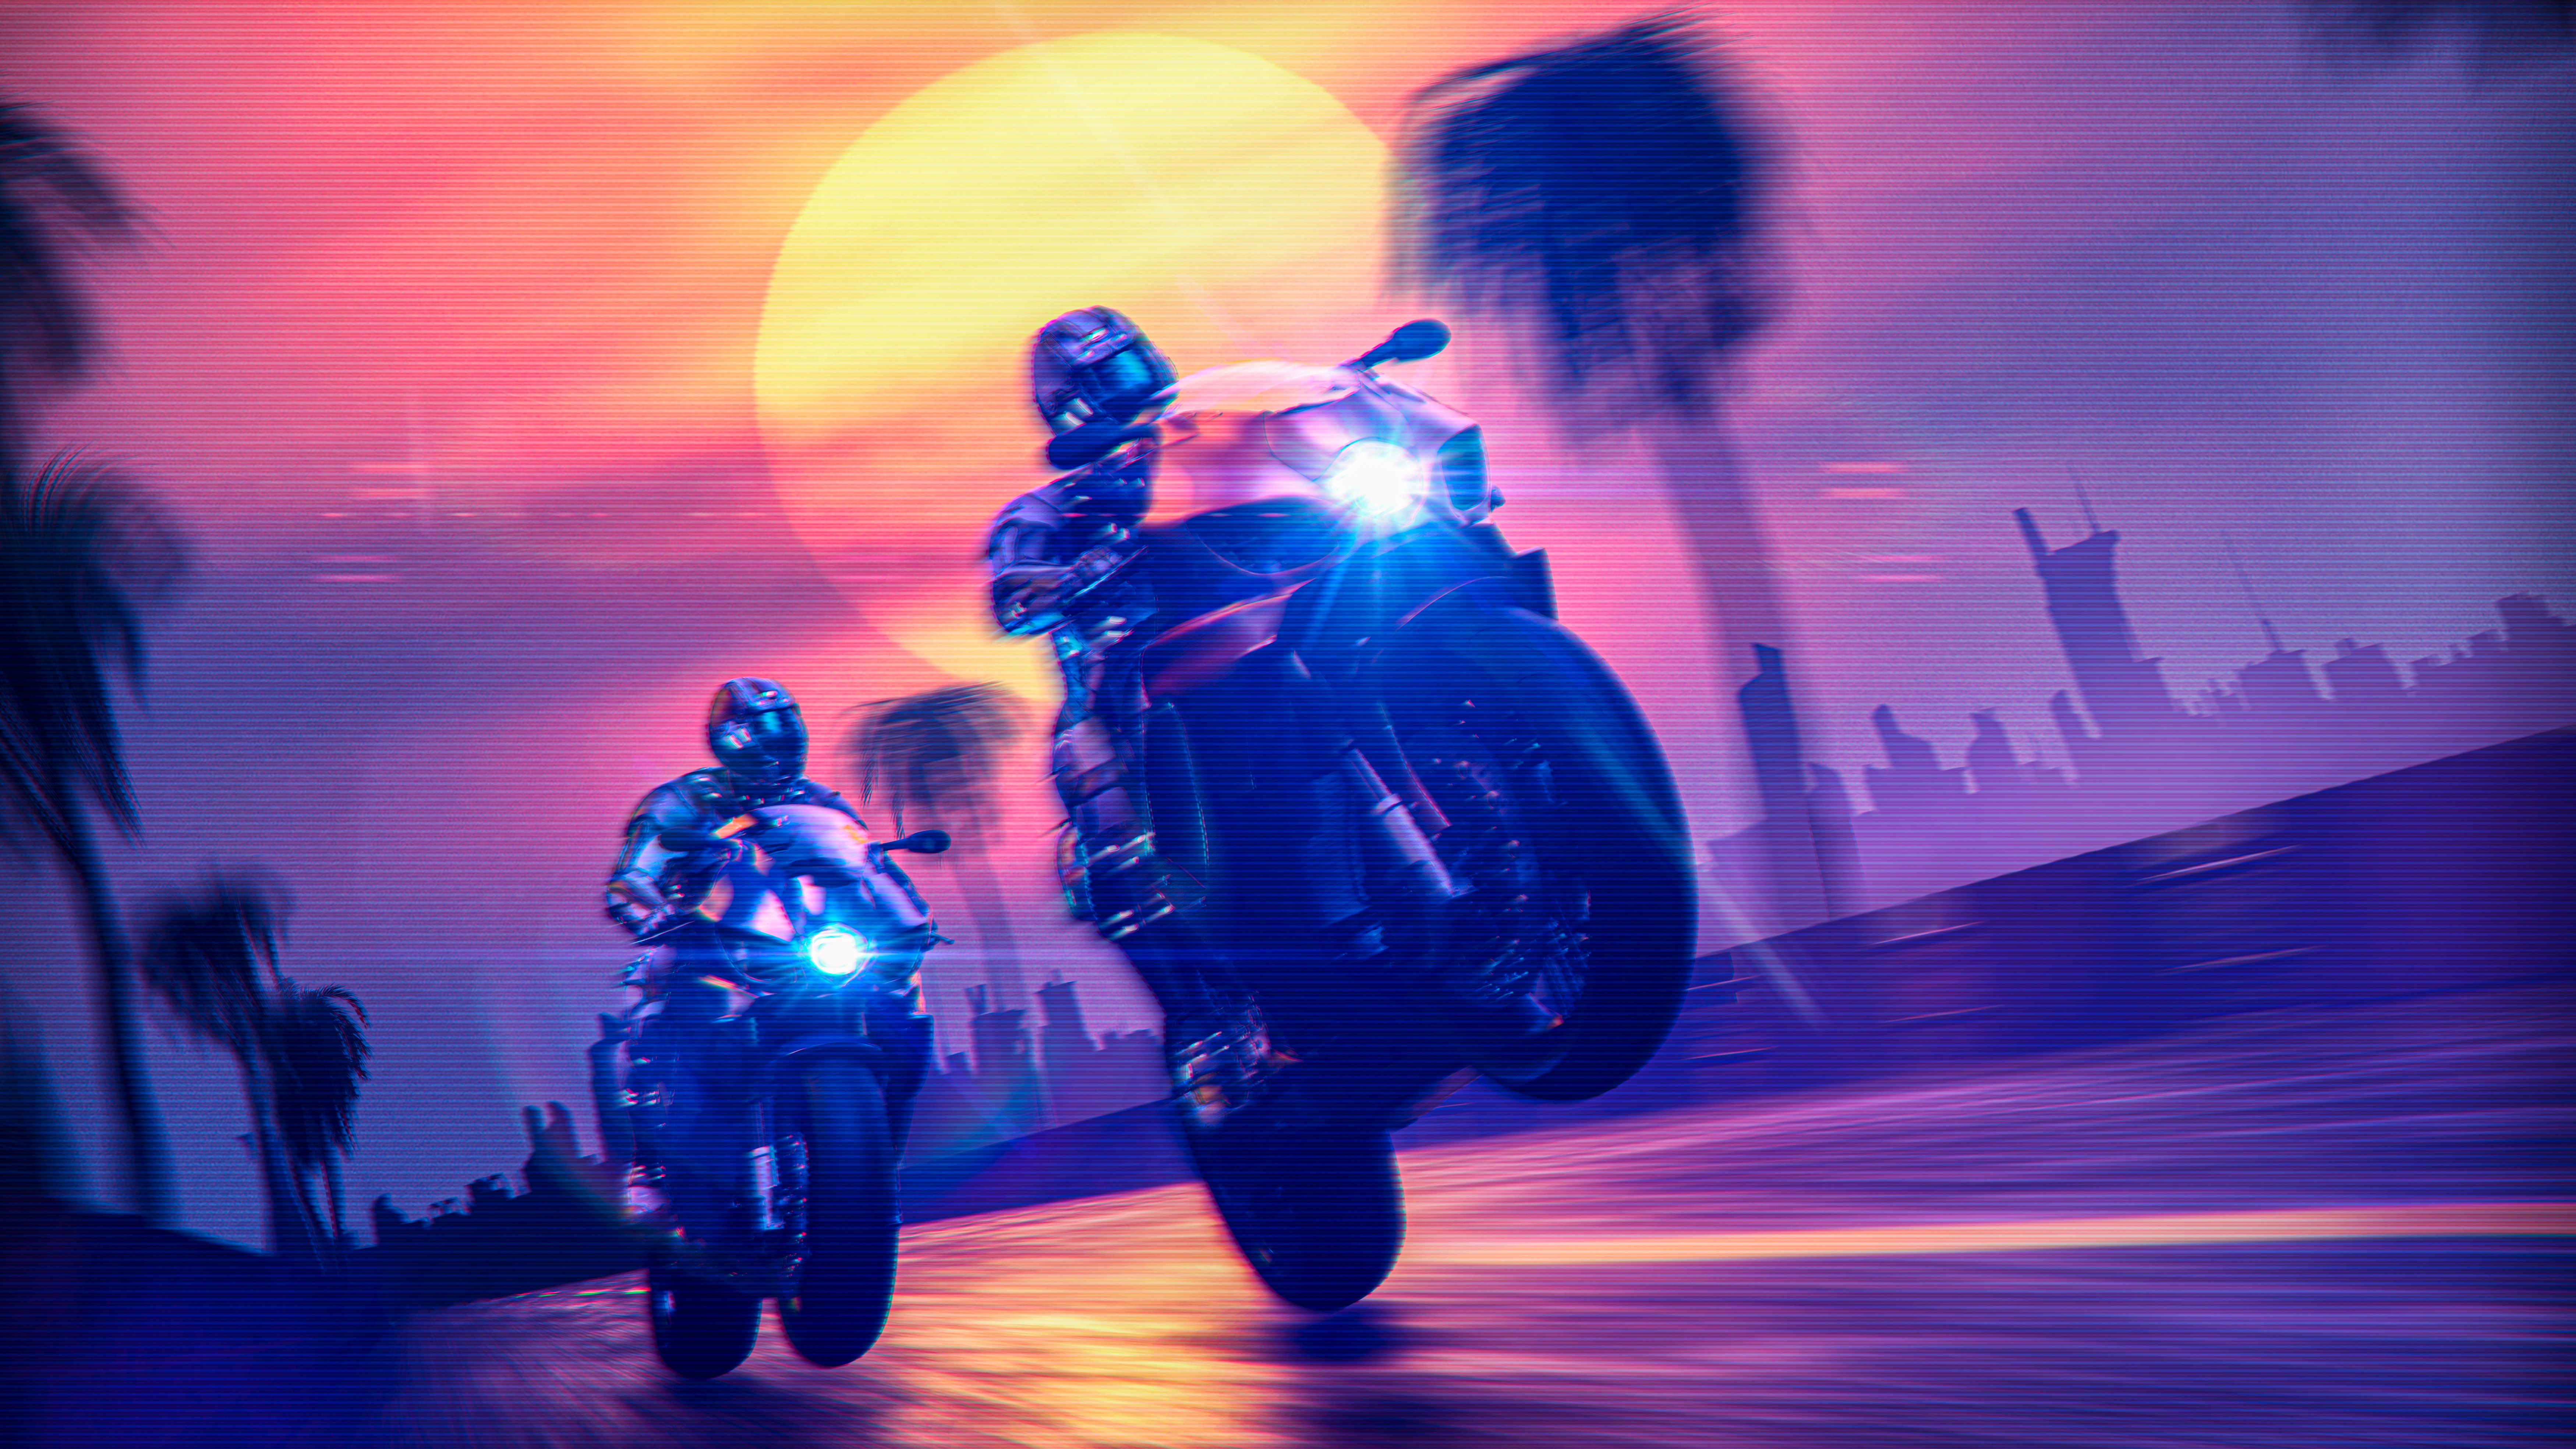 Cyberpunk Motorcycle Glitch Art Retro Style Glowing Sun 80s Science Fiction 3D Trees Sunset Colorful 7000x3938